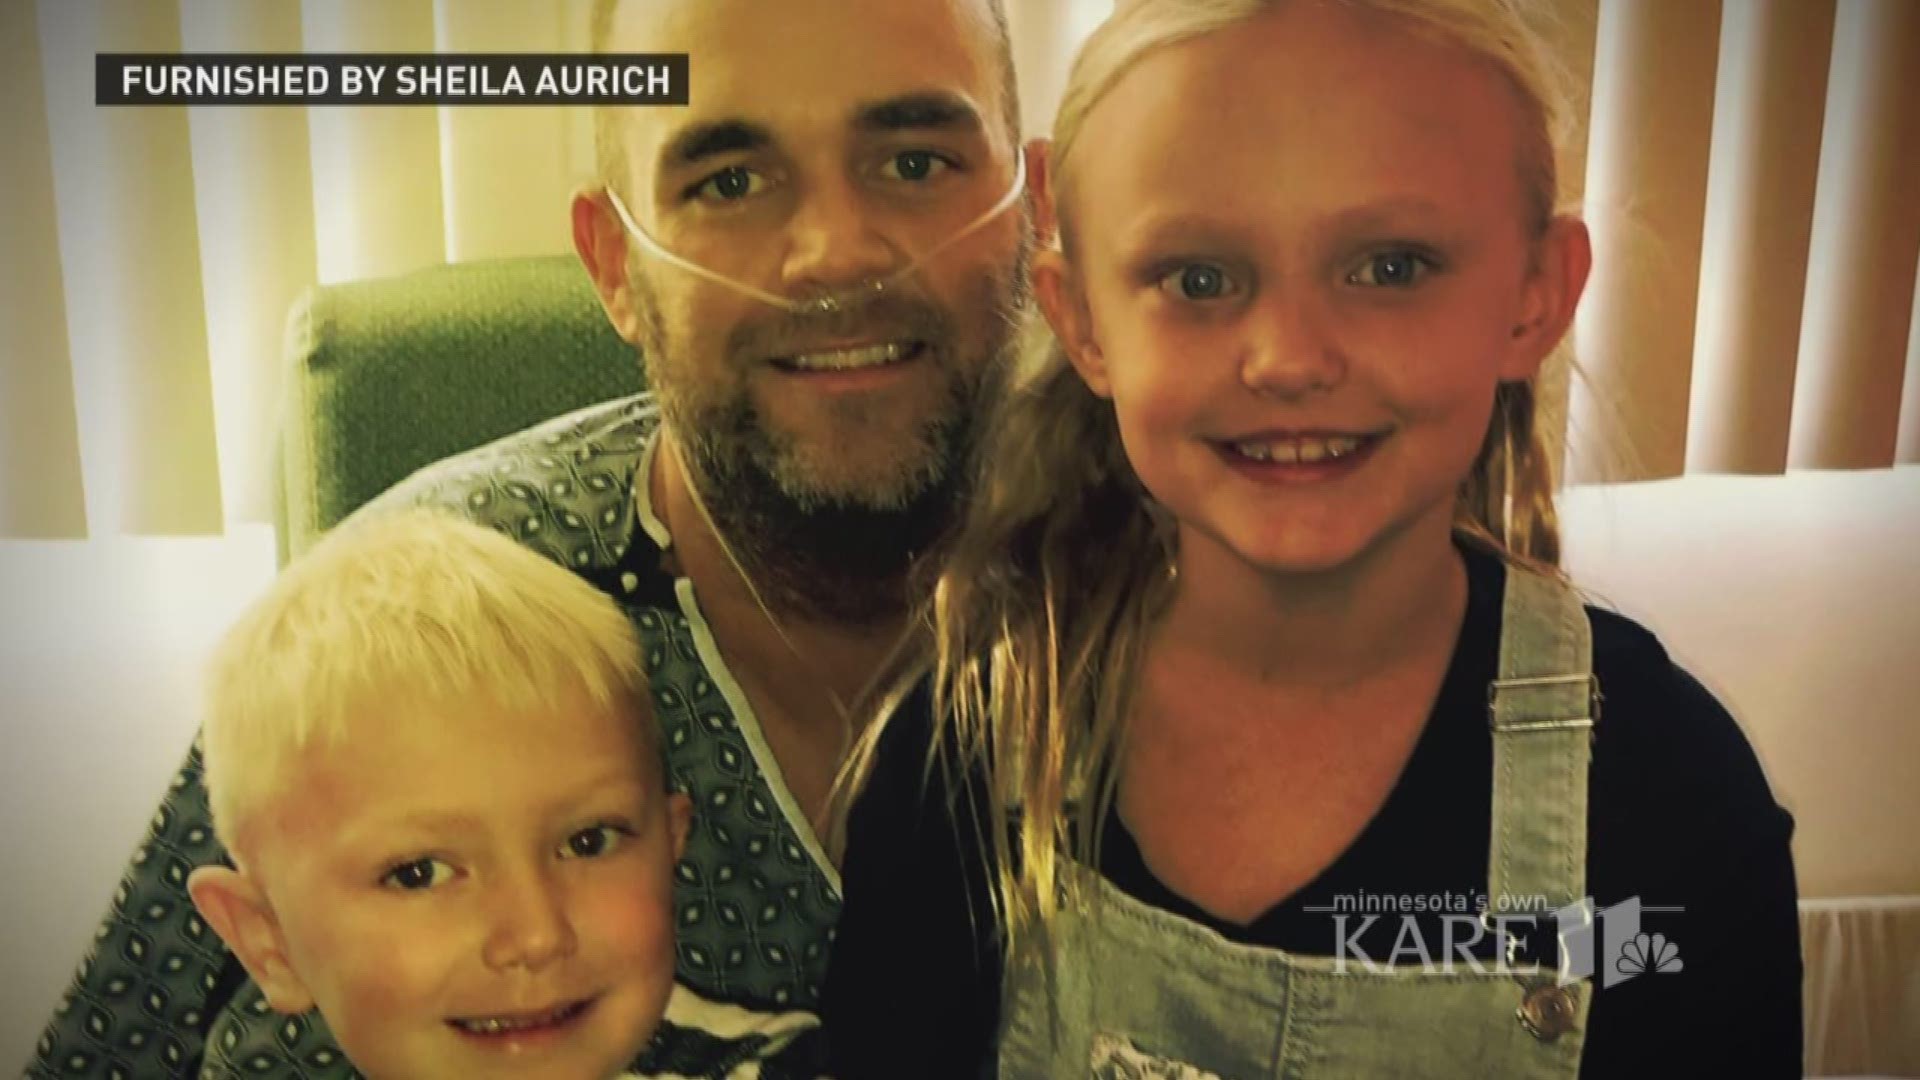 Minnesotan Phil Aurich is recovering in the hospital after he suffered a gunshot wound in the mass shooting in Las Vegas. Aurich's family says he has been moved from the ICU and can now spend time with his children.